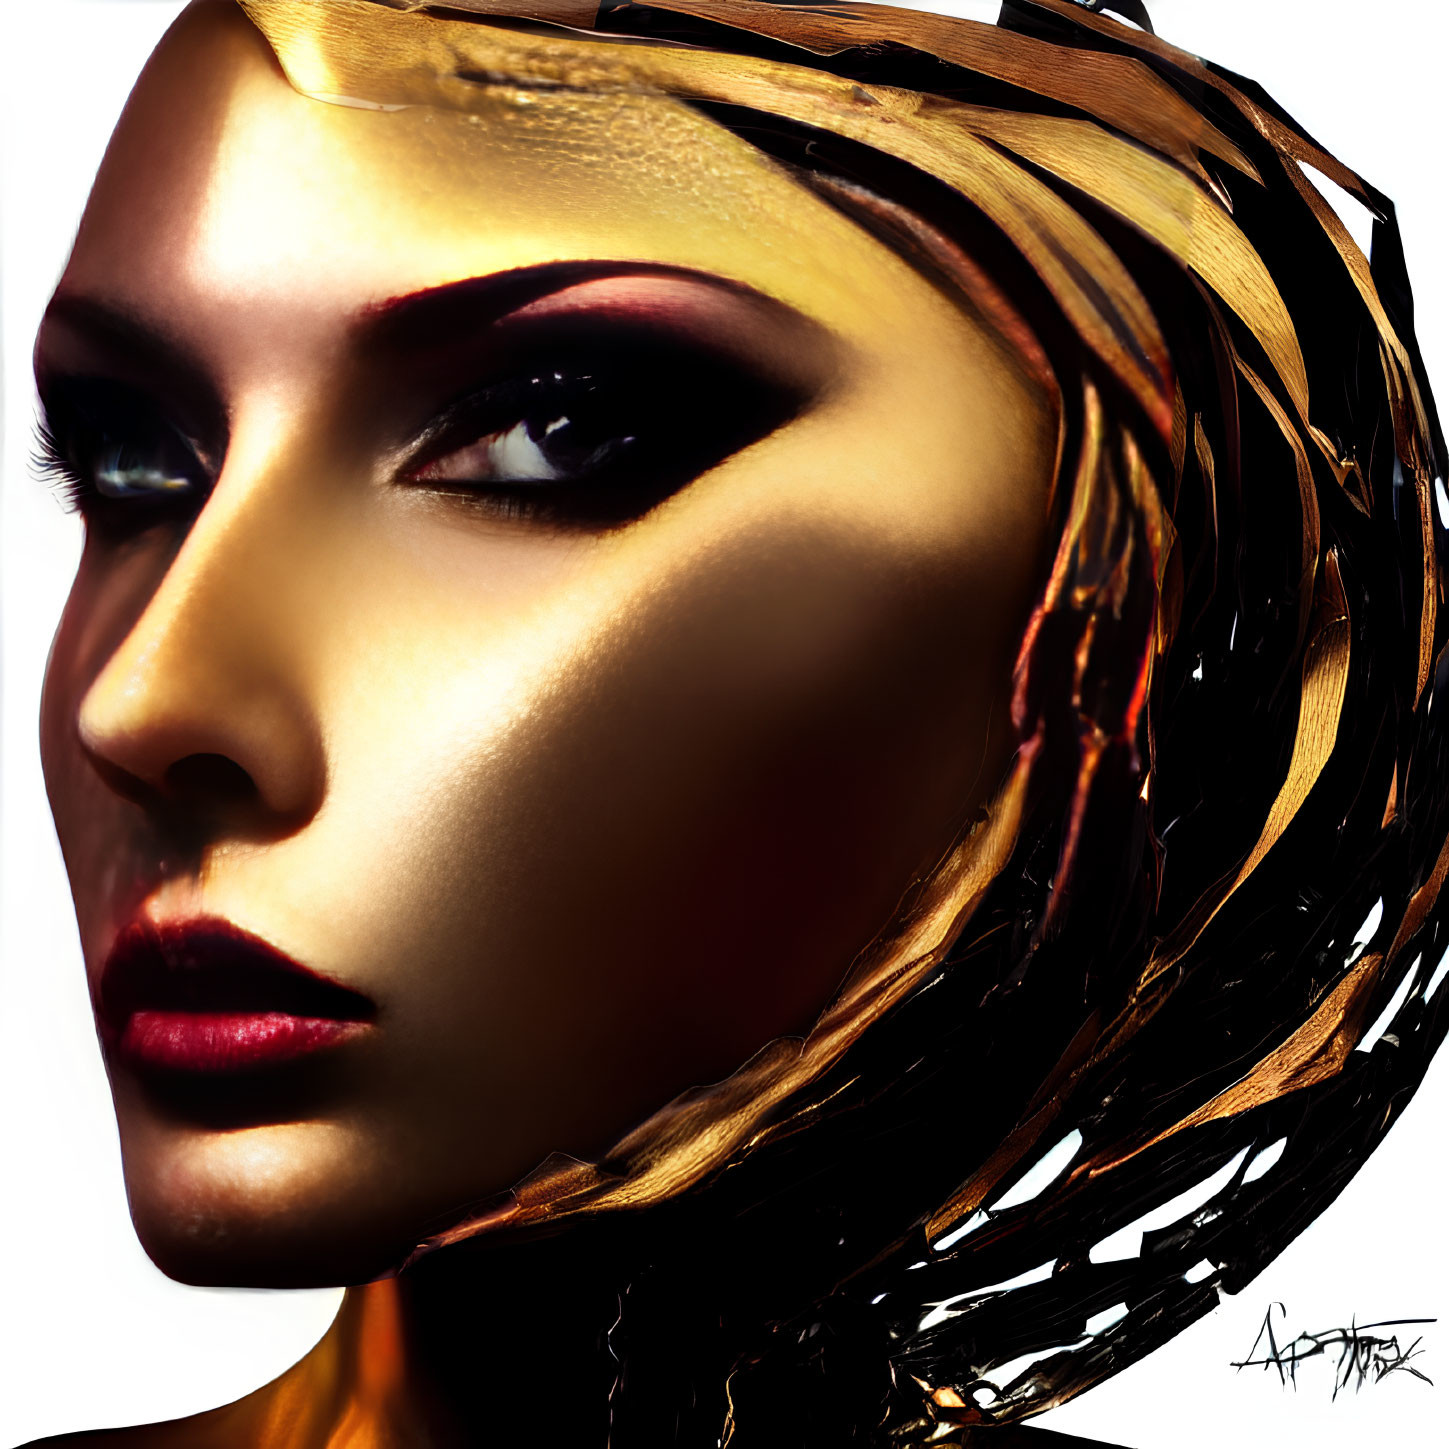 Person with Golden Makeup and Metallic Headdress Portrait